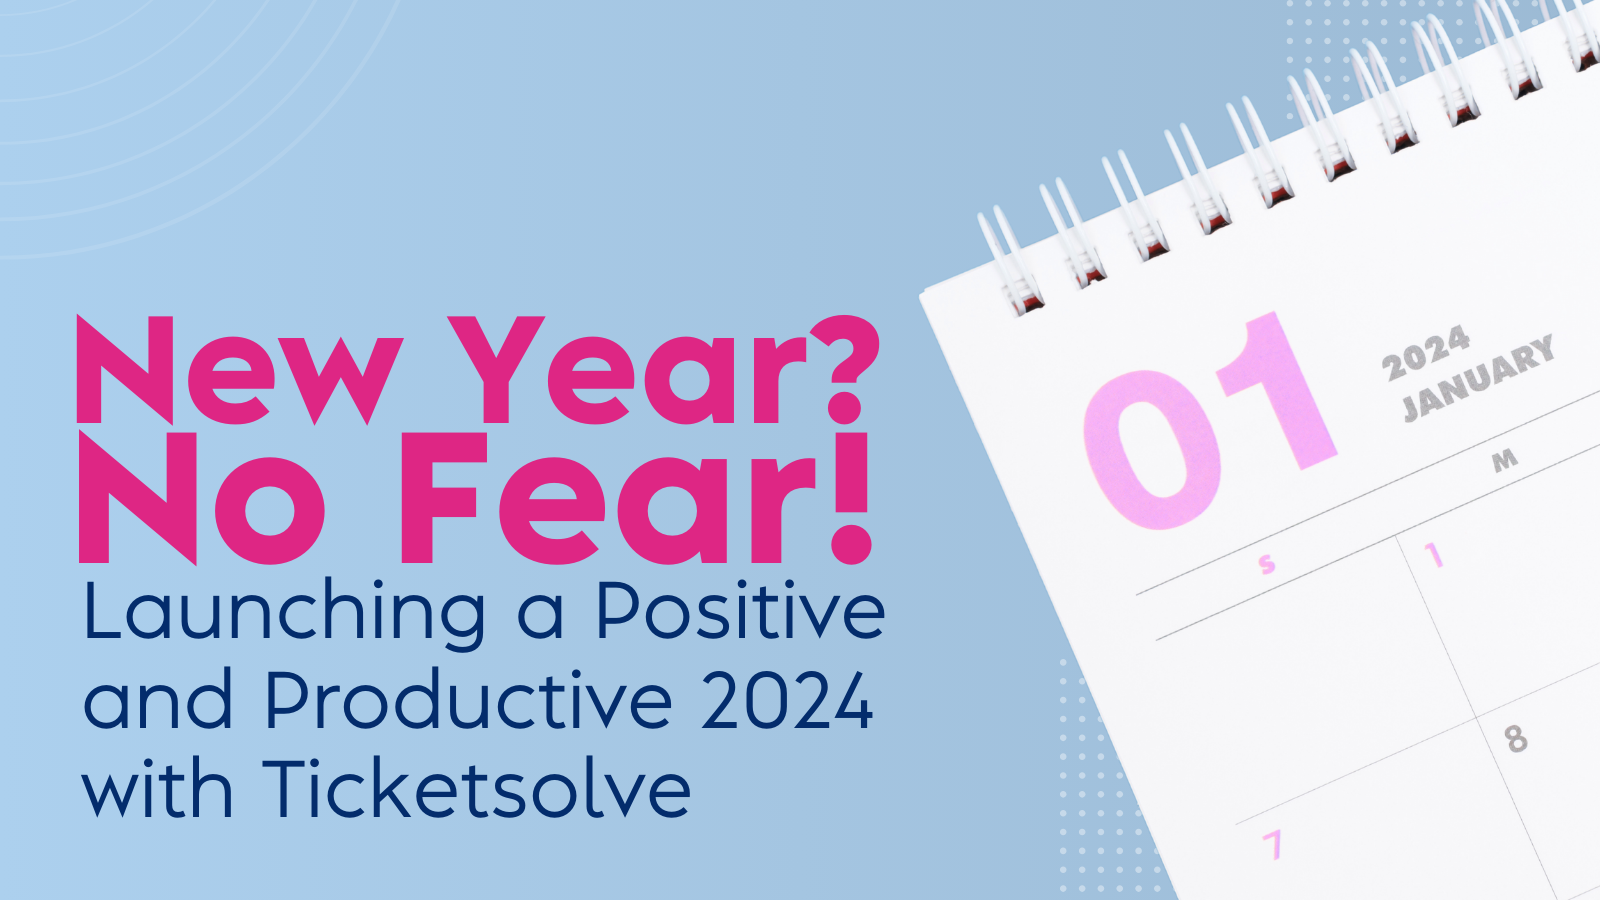 New Year? No fear! Launching a Positive and Productive 2024 with Ticketsolve